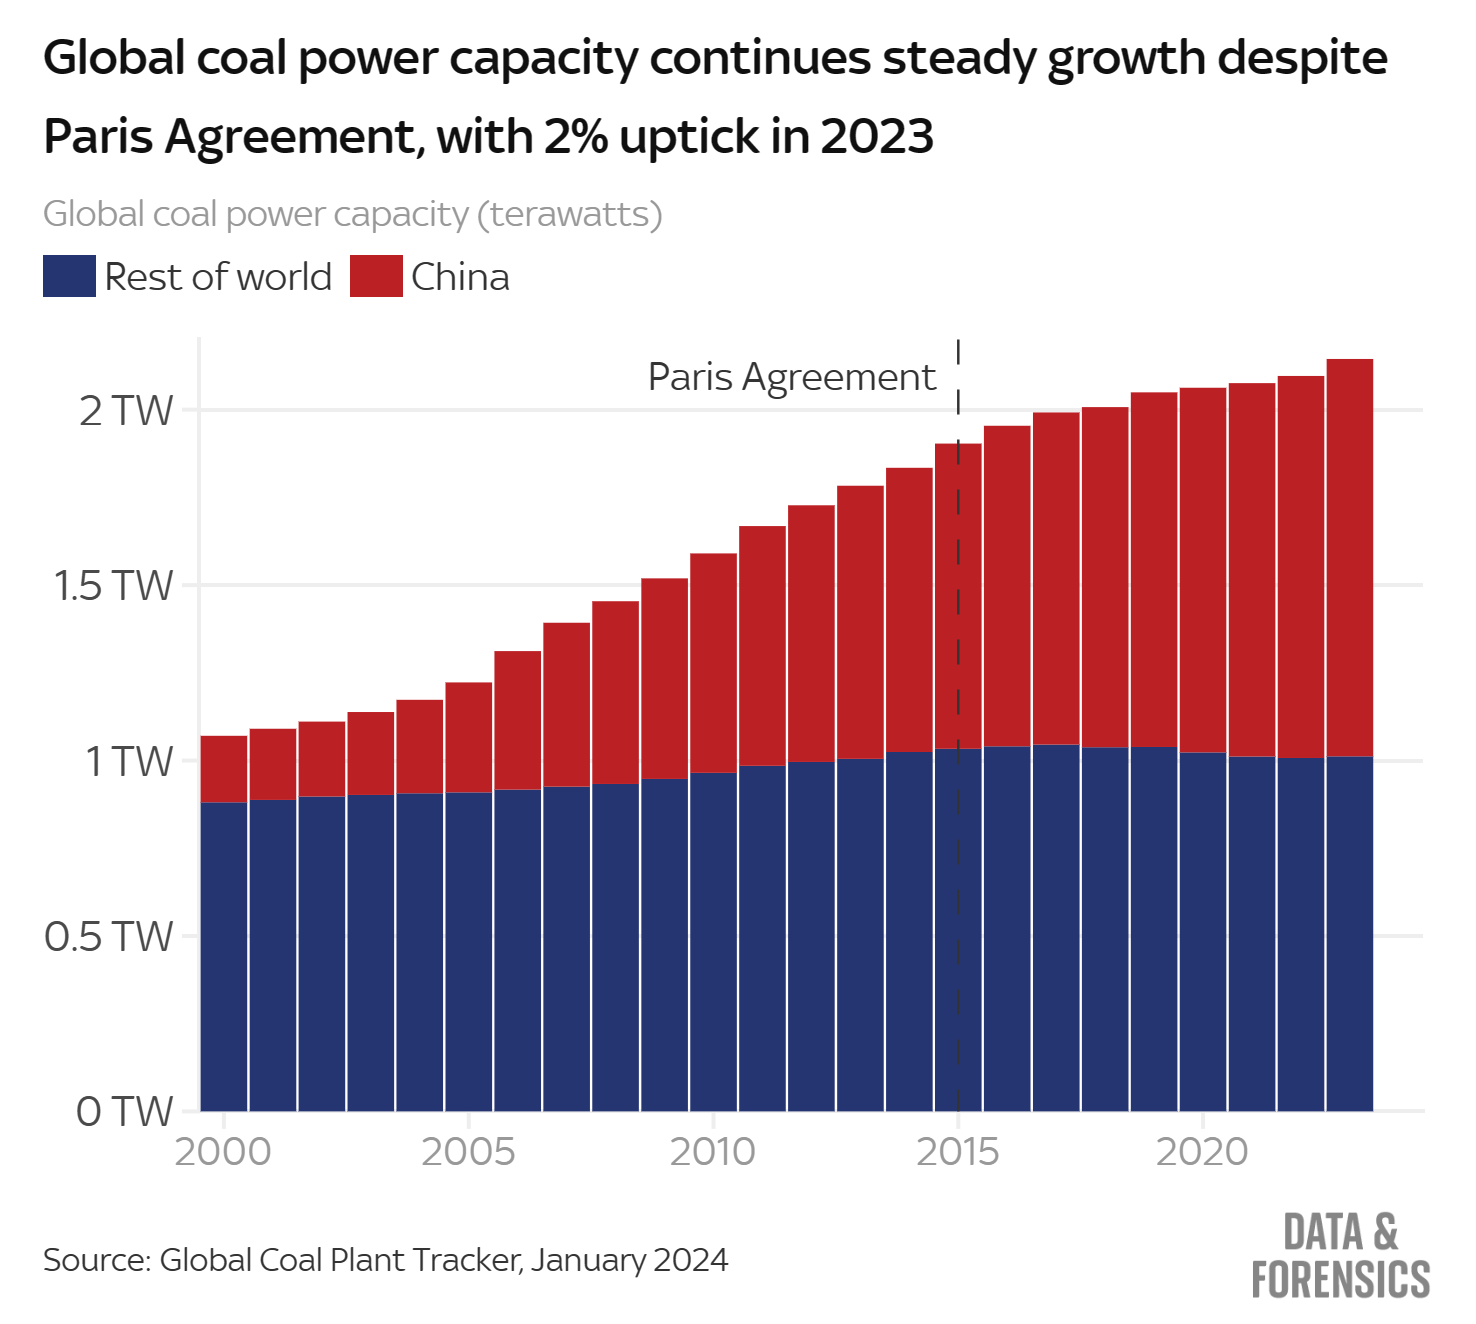 Global coal power capacity (terawatts), 2000-2023. Global coal power capacity continues steady growth despite Paris Agreement, with 2 percent uptick in 2023.
Data: GEM Global Coal Plant Tracker, January 2024. Graphic: Daniel Dunford / Sky News